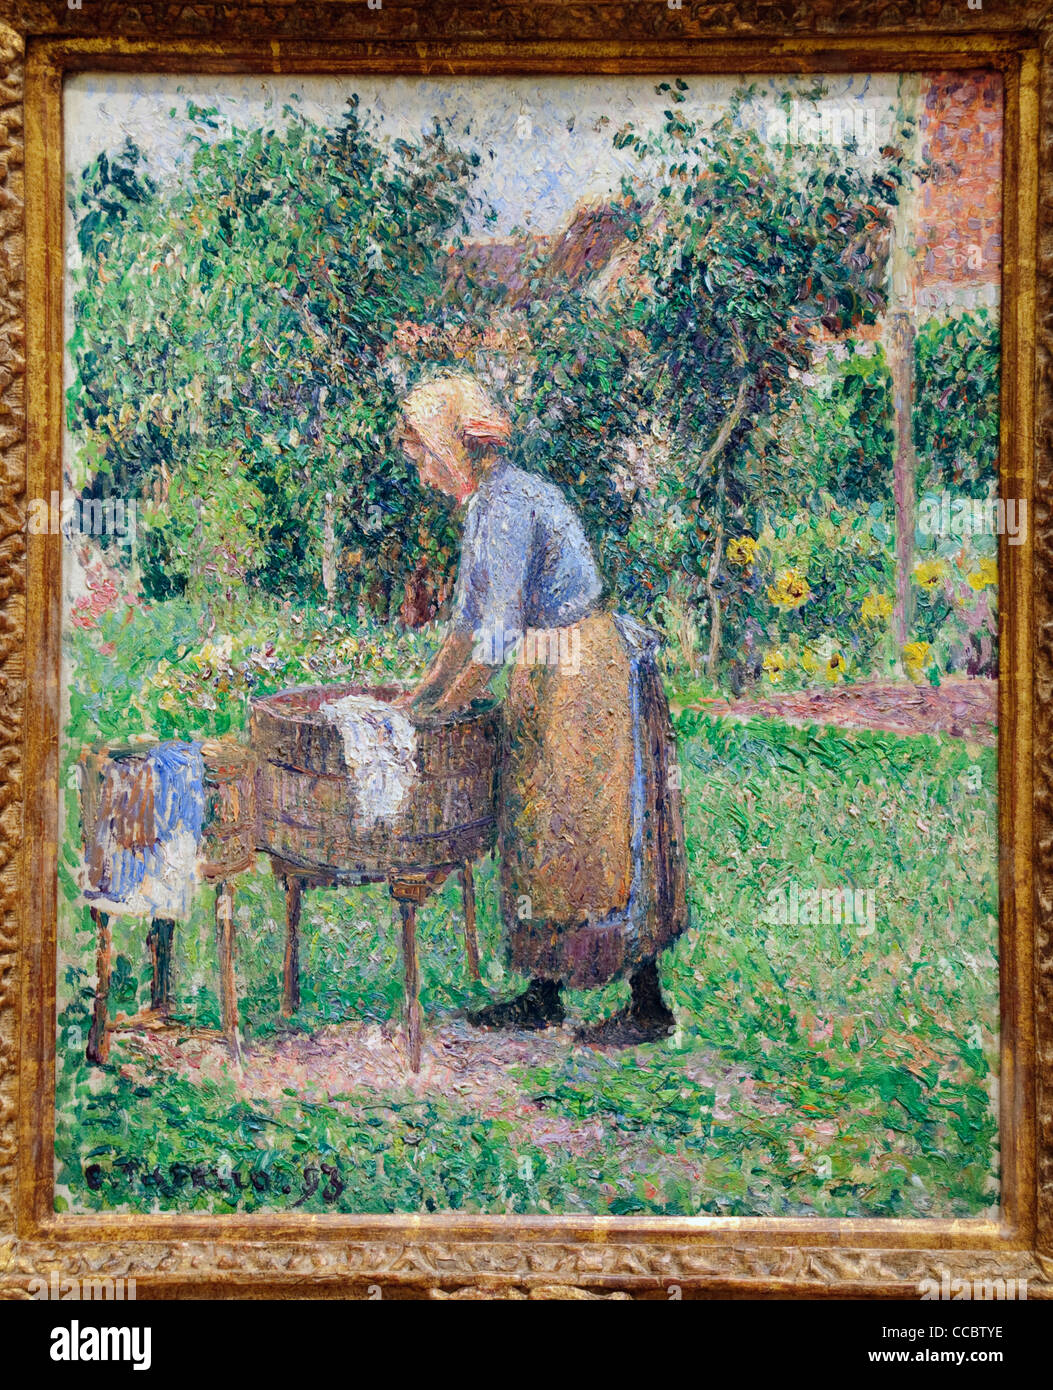 A Washerwoman at Eragny, 1893, by Camille Pissarro, Stock Photo